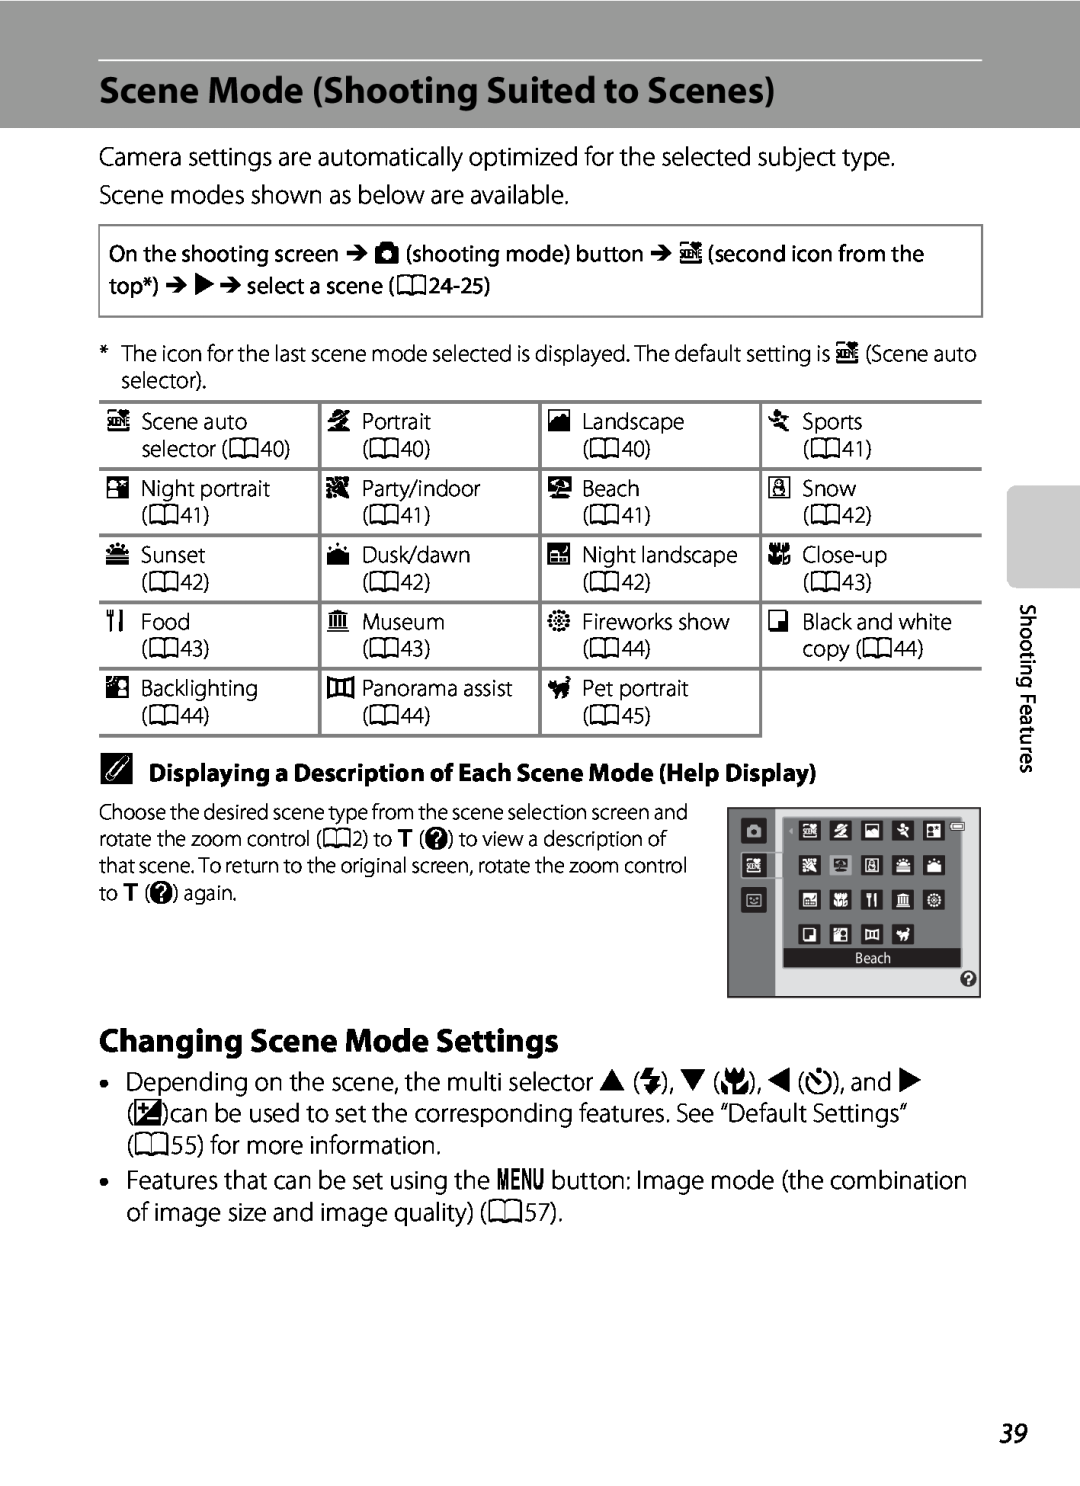 Nikon S2600 manual Scene Mode Shooting Suited to Scenes, Changing Scene Mode Settings 